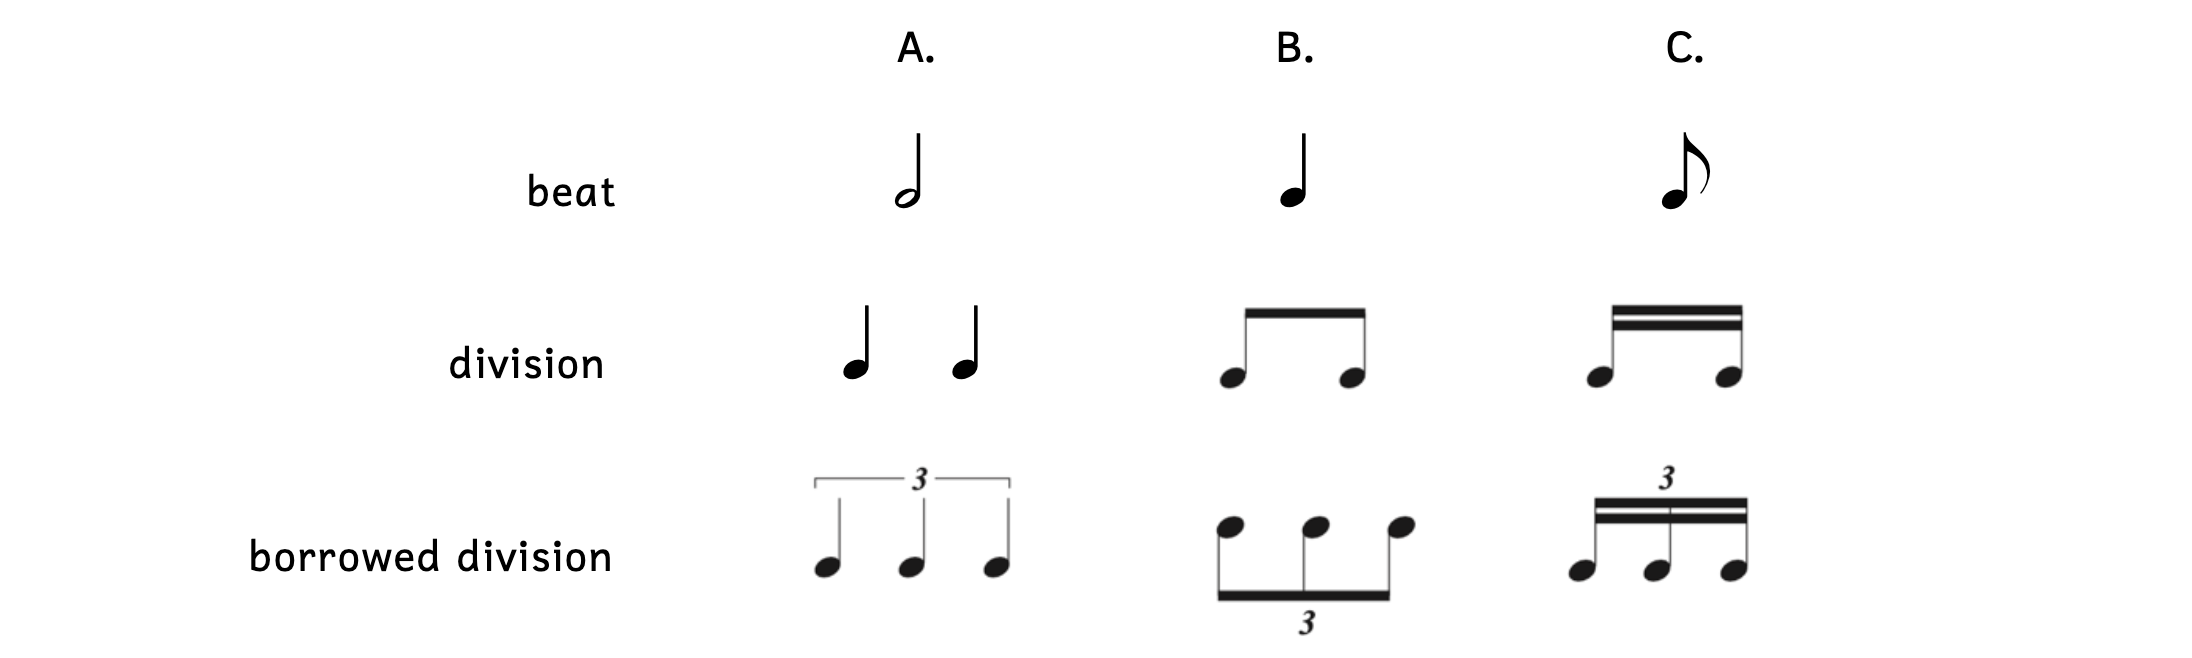 Examples of triplets. Column A shows a half note with a quarter-note division and therefore quarter-note triplets. Column B shows a quarter note with an eighth-note division and thus eighth-note triplets. Column C shows an eighth-note beat with a sixteenth-note division and therefore sixteenth-note triplets.